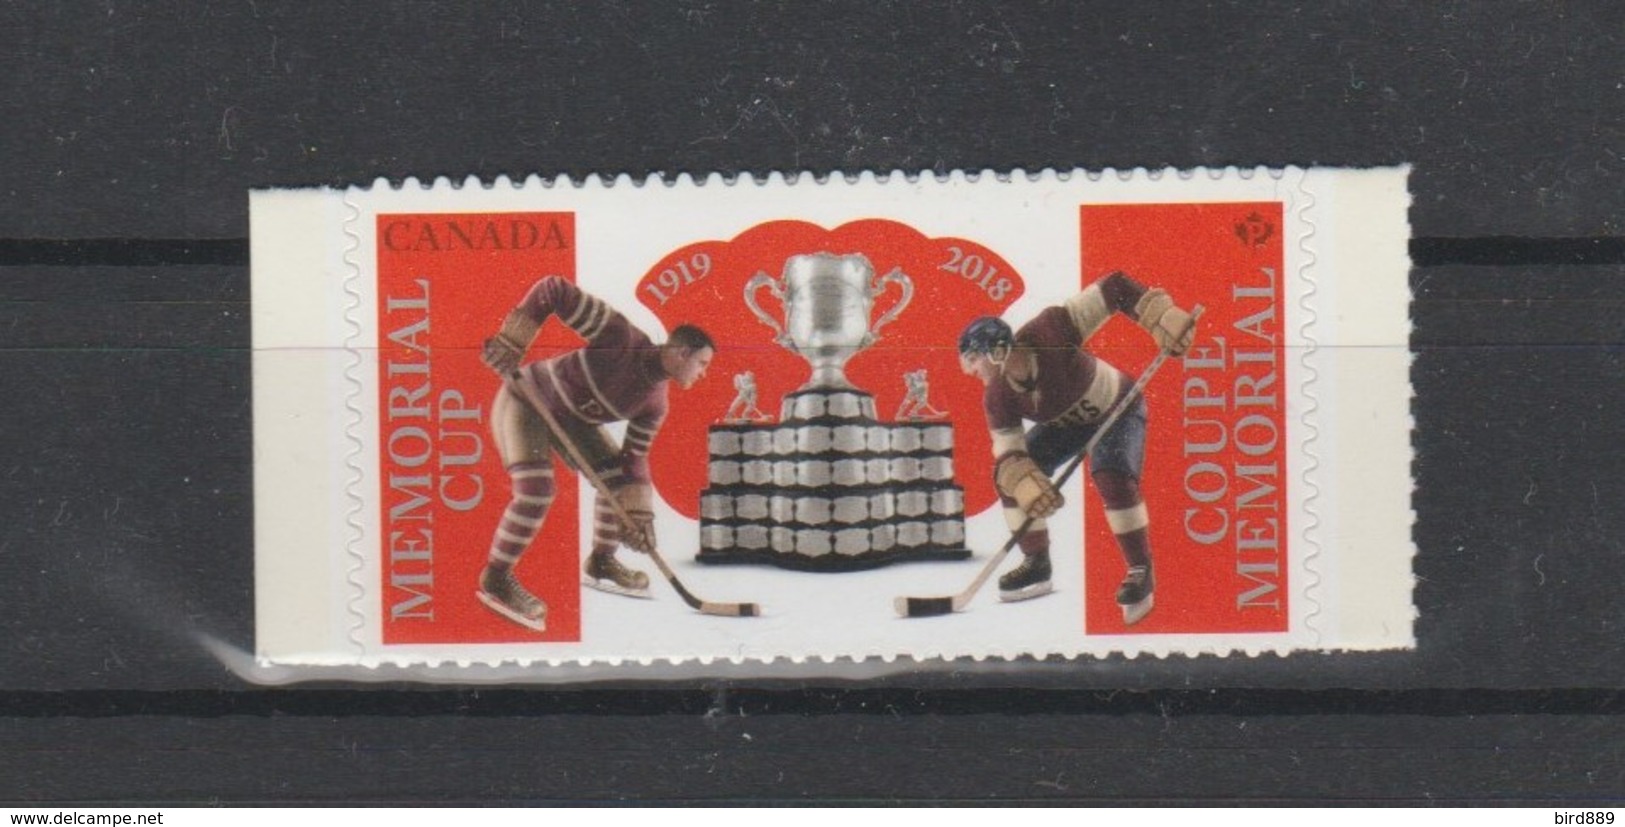 2018 Canada Memorial Cup Hockey Single Stamp From Booklet MNH - Single Stamps